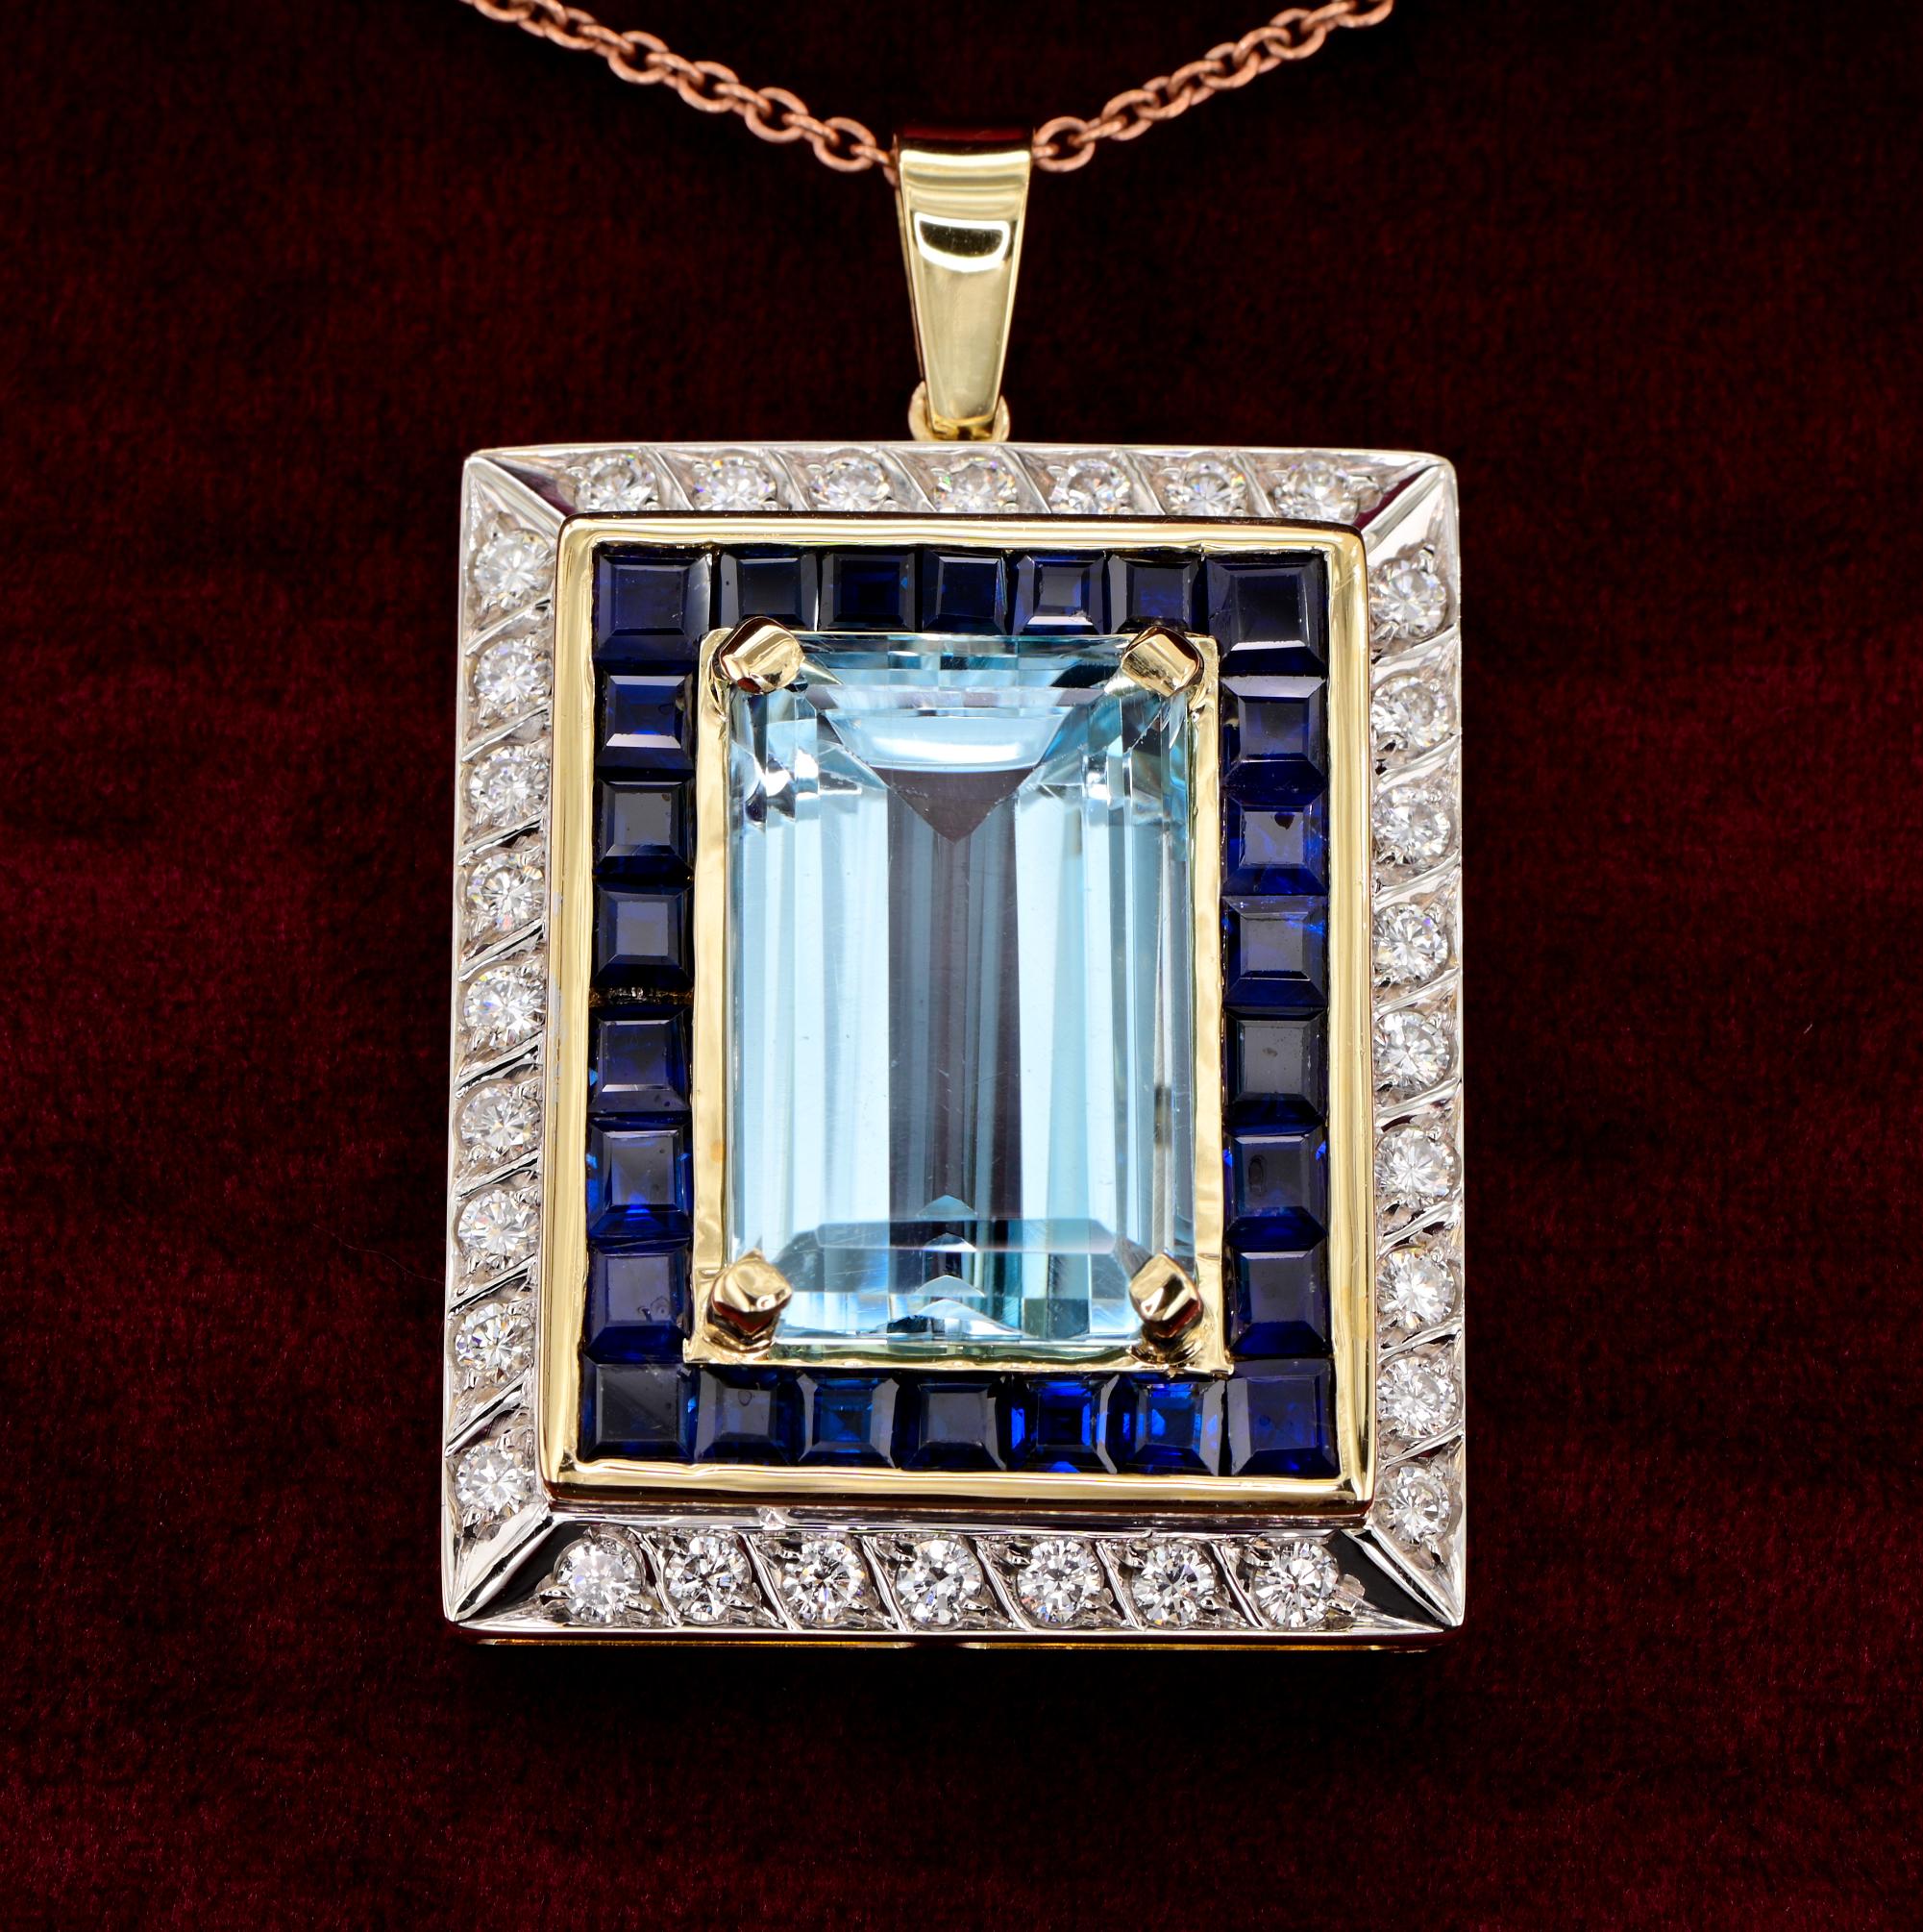 A Must Have
This remarkable vintage pendant is 1960 ca
Classy ever green style of high end jewellery
Entirely hand crafted as unique of solid 18 KT gold and some platinum portions
beautiful net design taking inspiration by the shape of the main